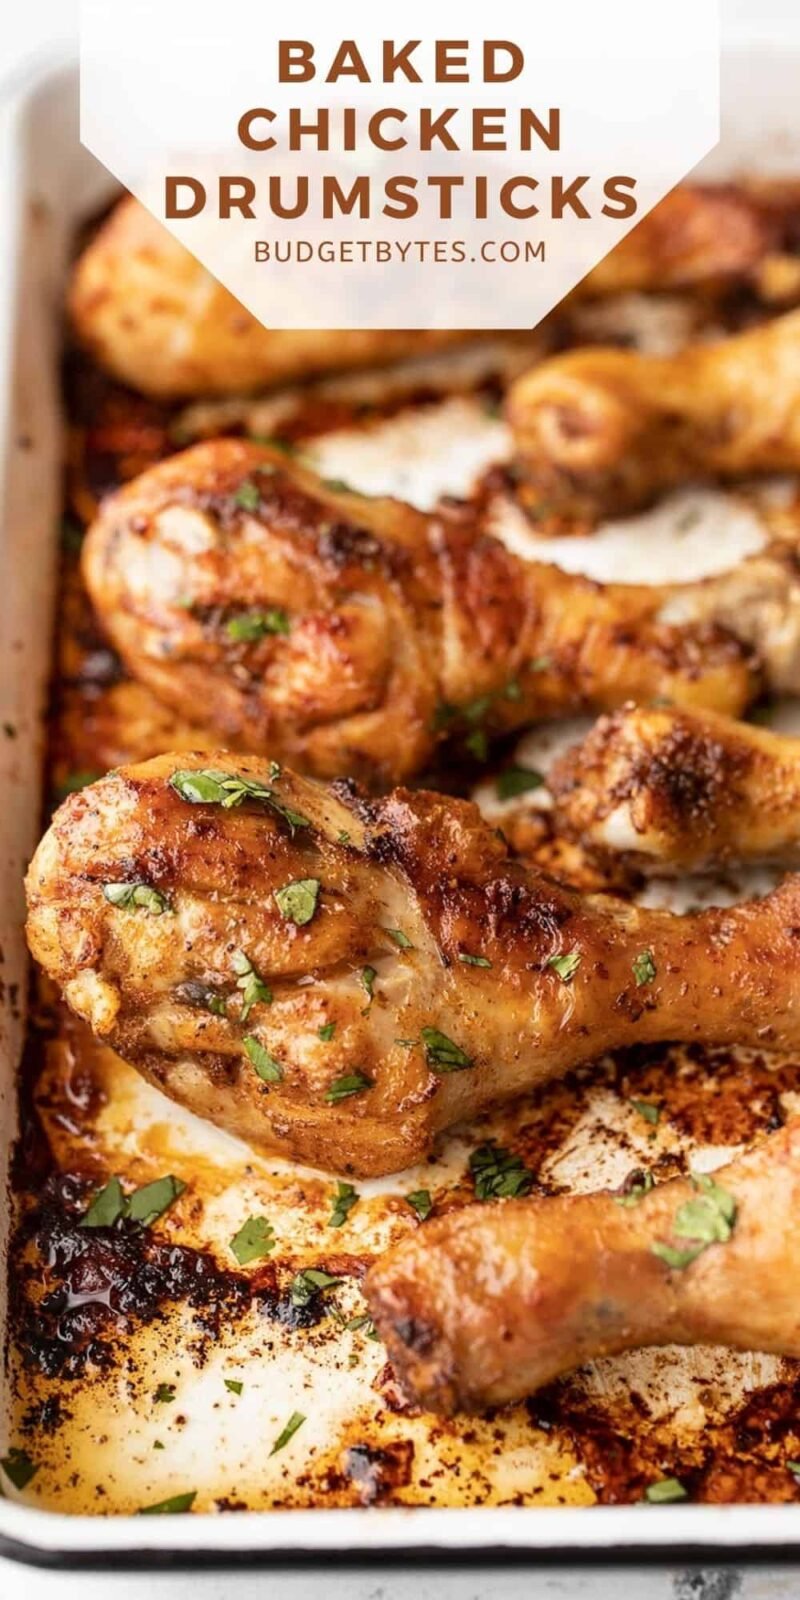 Side view of baked chicken drumsticks on a baking sheet, title text at the top